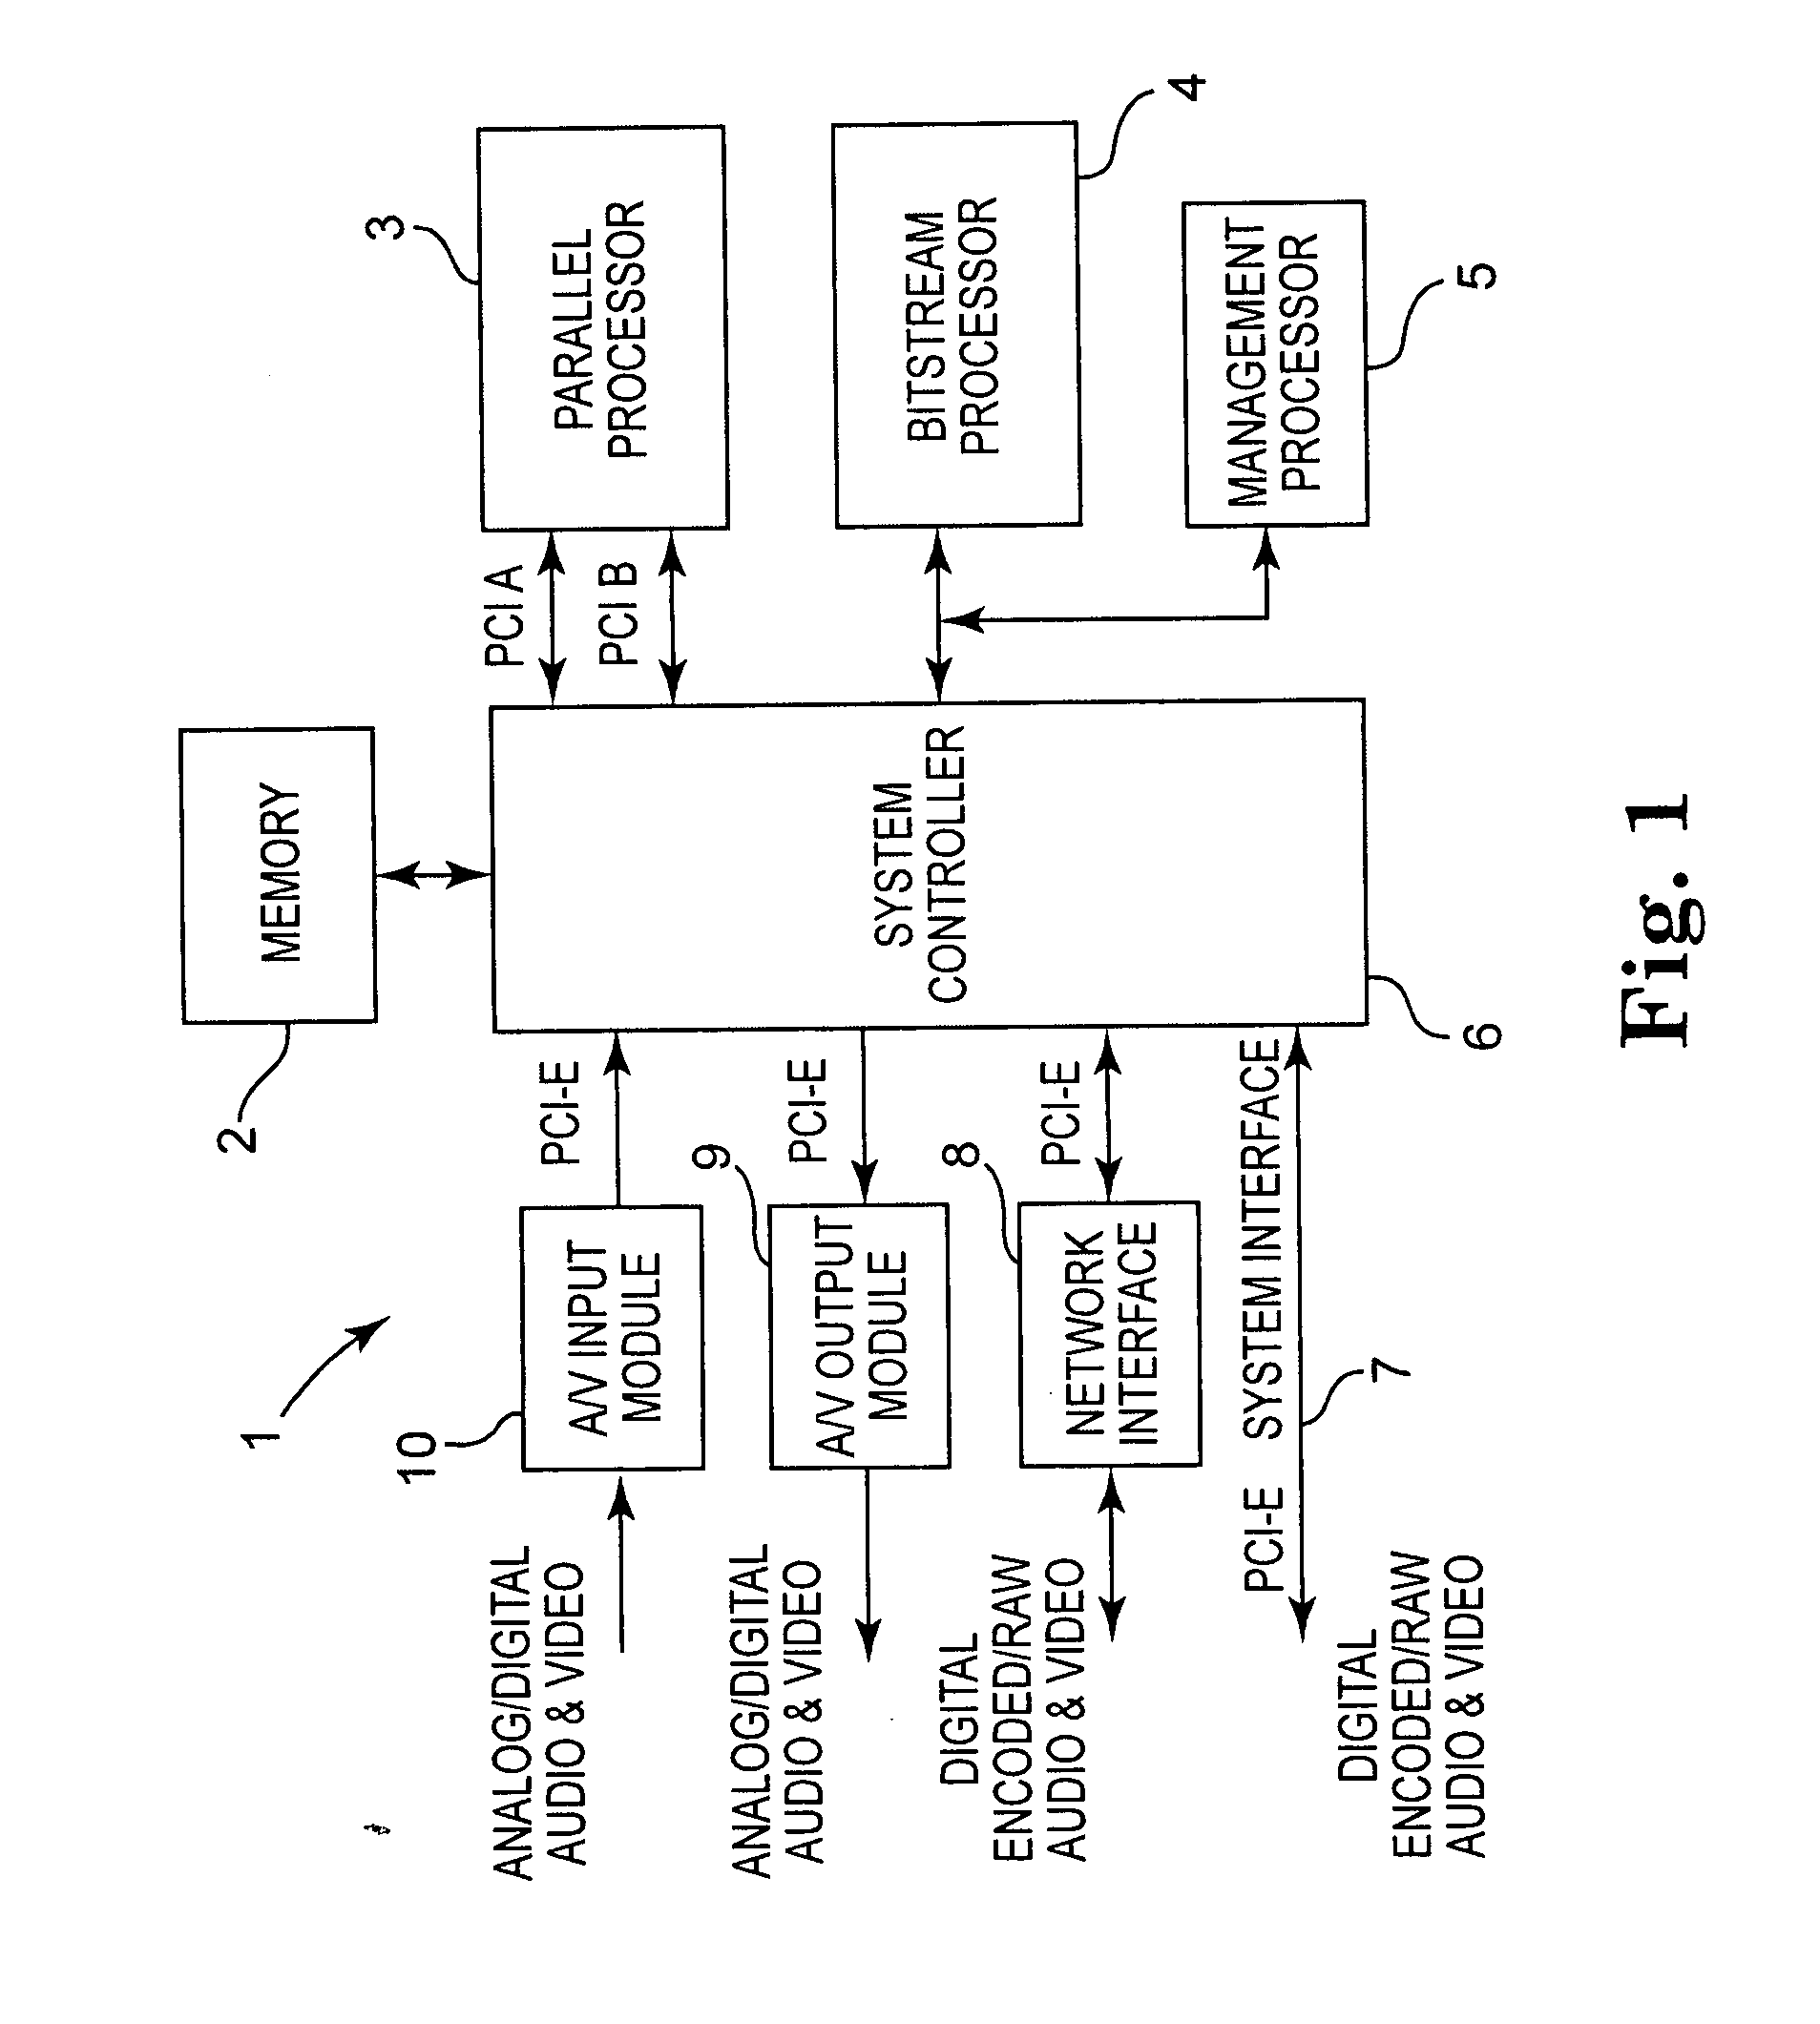 Encoding, decoding and transcoding of audio/video signals using combined parallel and serial processing techniques